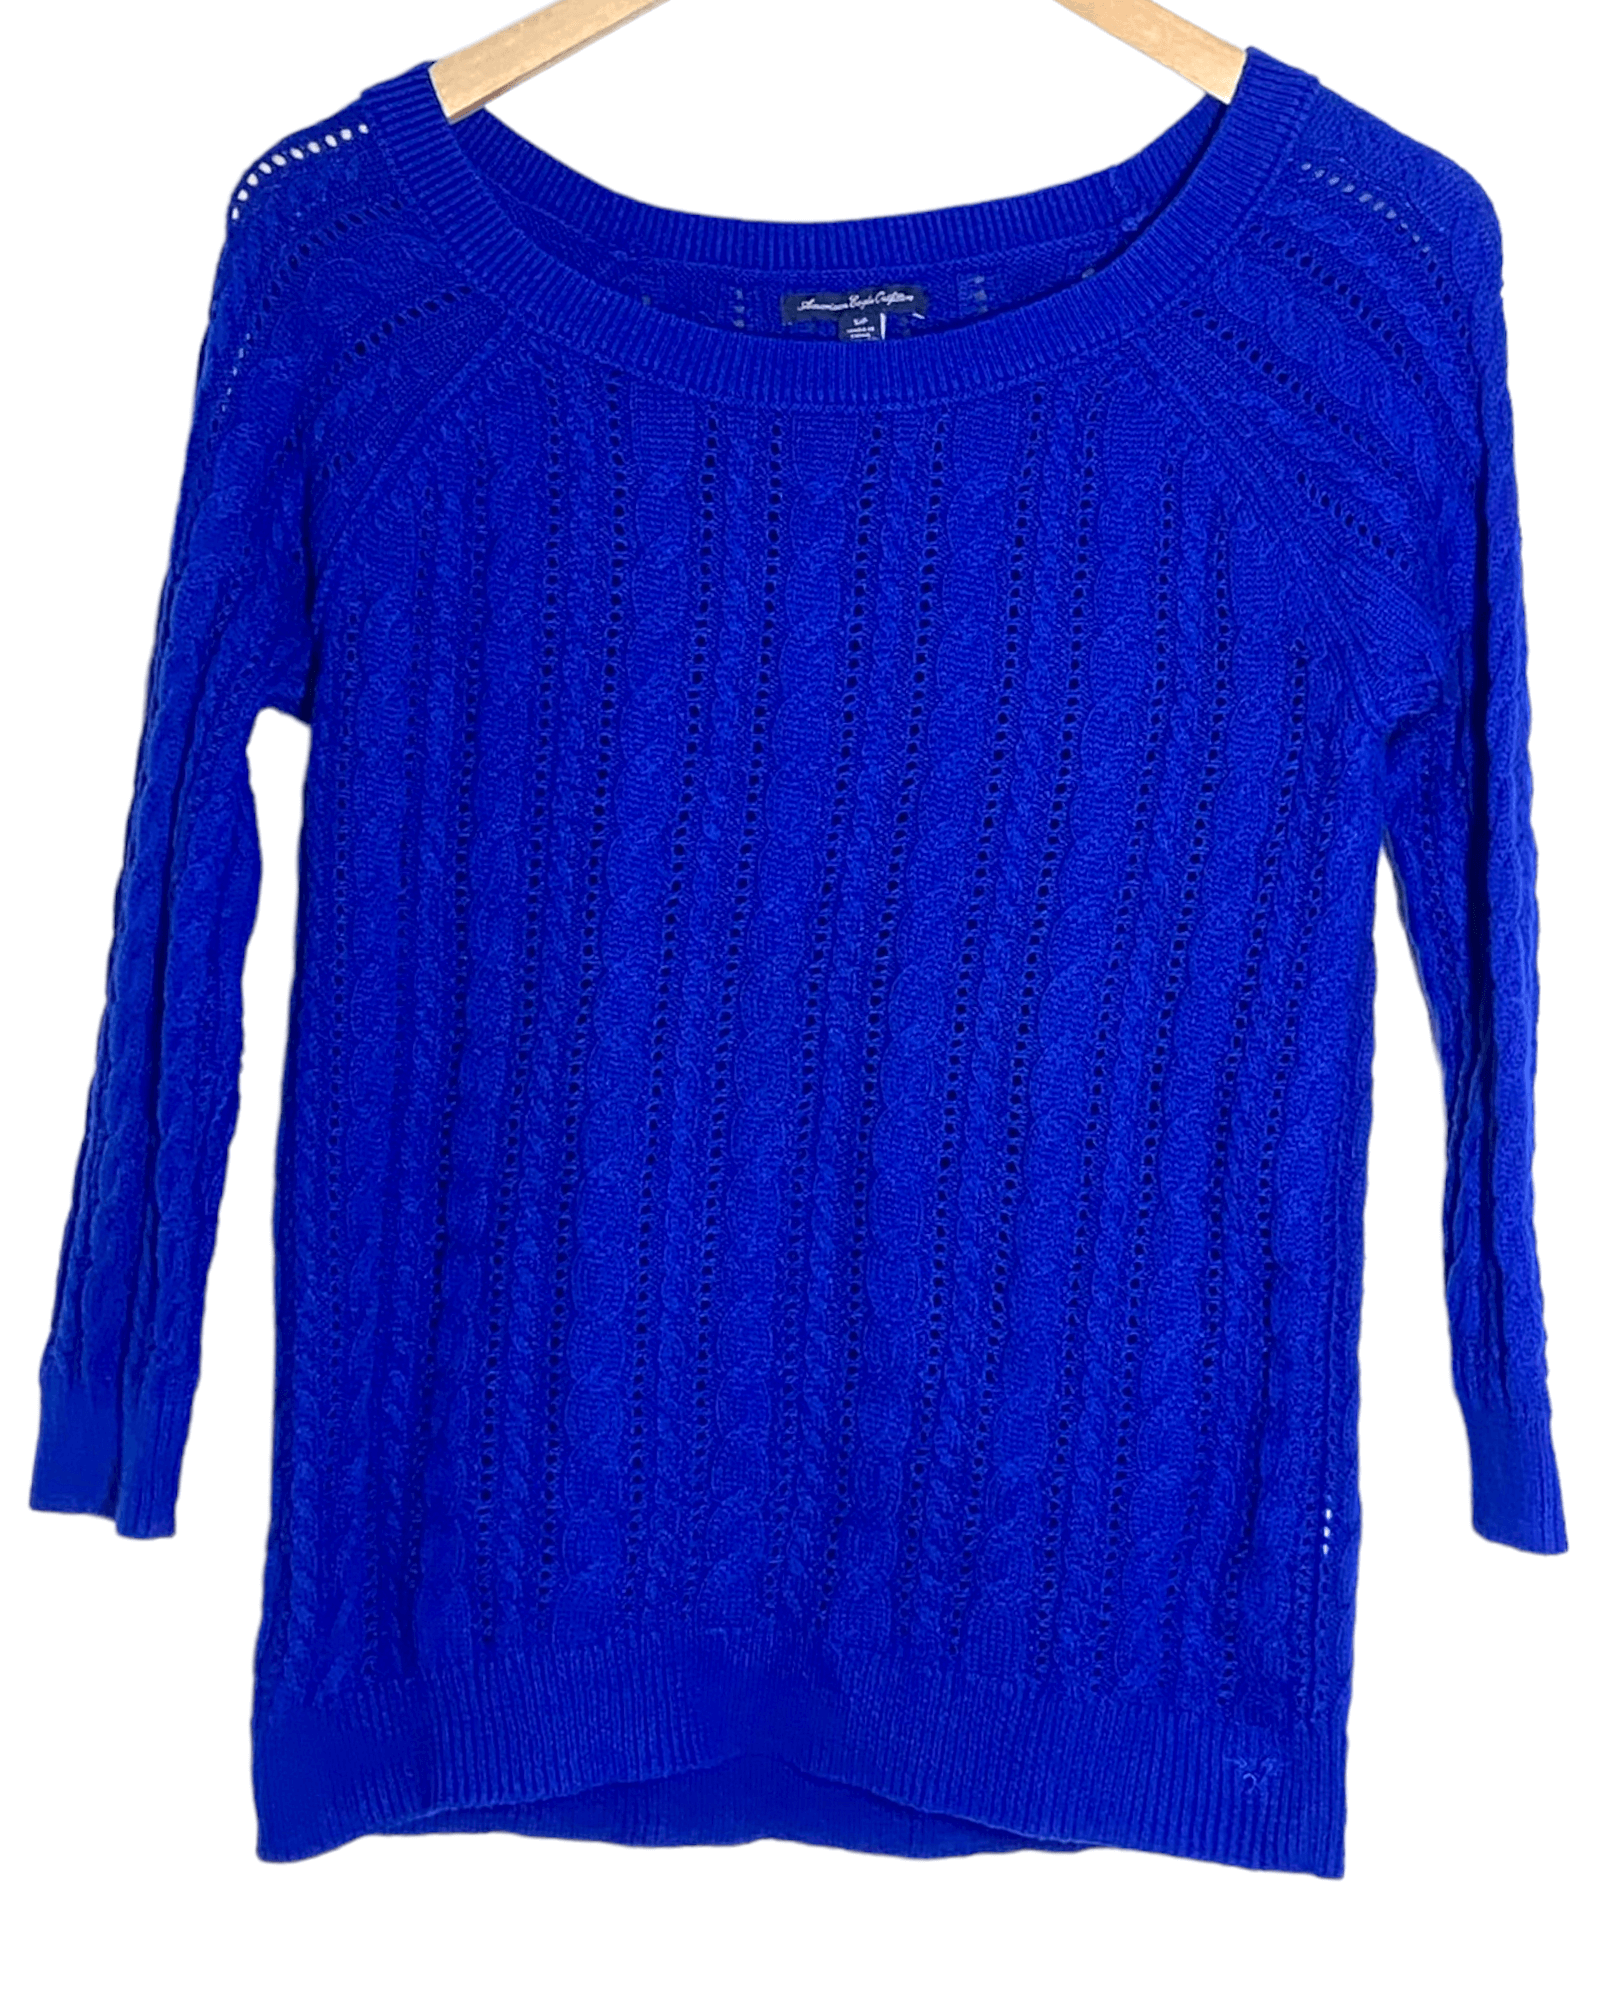 Brith Winter AMERICAN EAGLE cobalt royal blue cable knit sweater